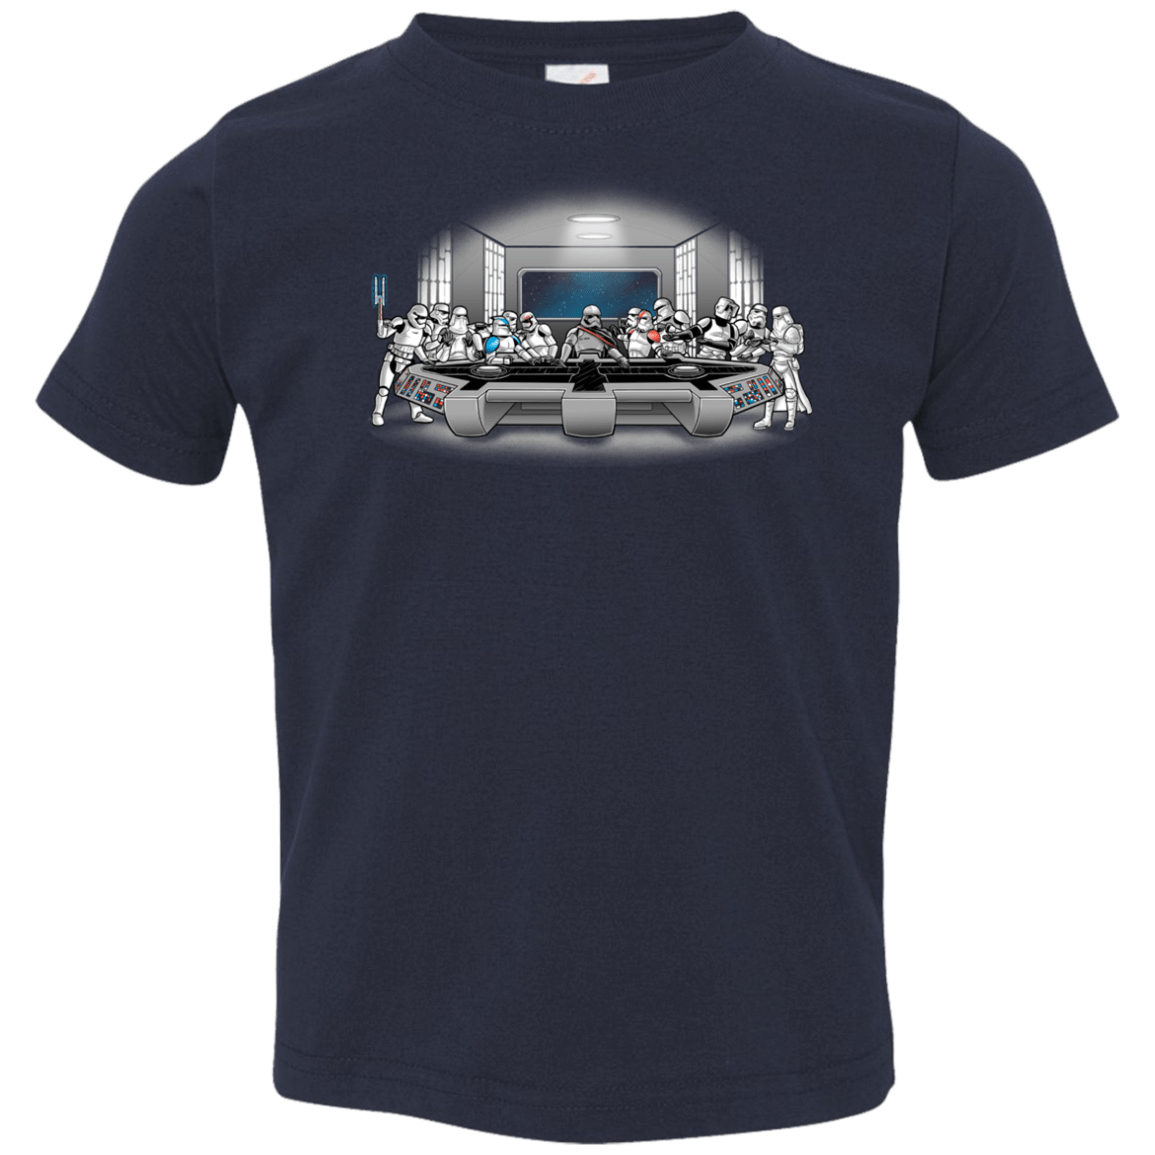 T-Shirts Navy / 2T Troopers Dinner Toddler Premium T-Shirt